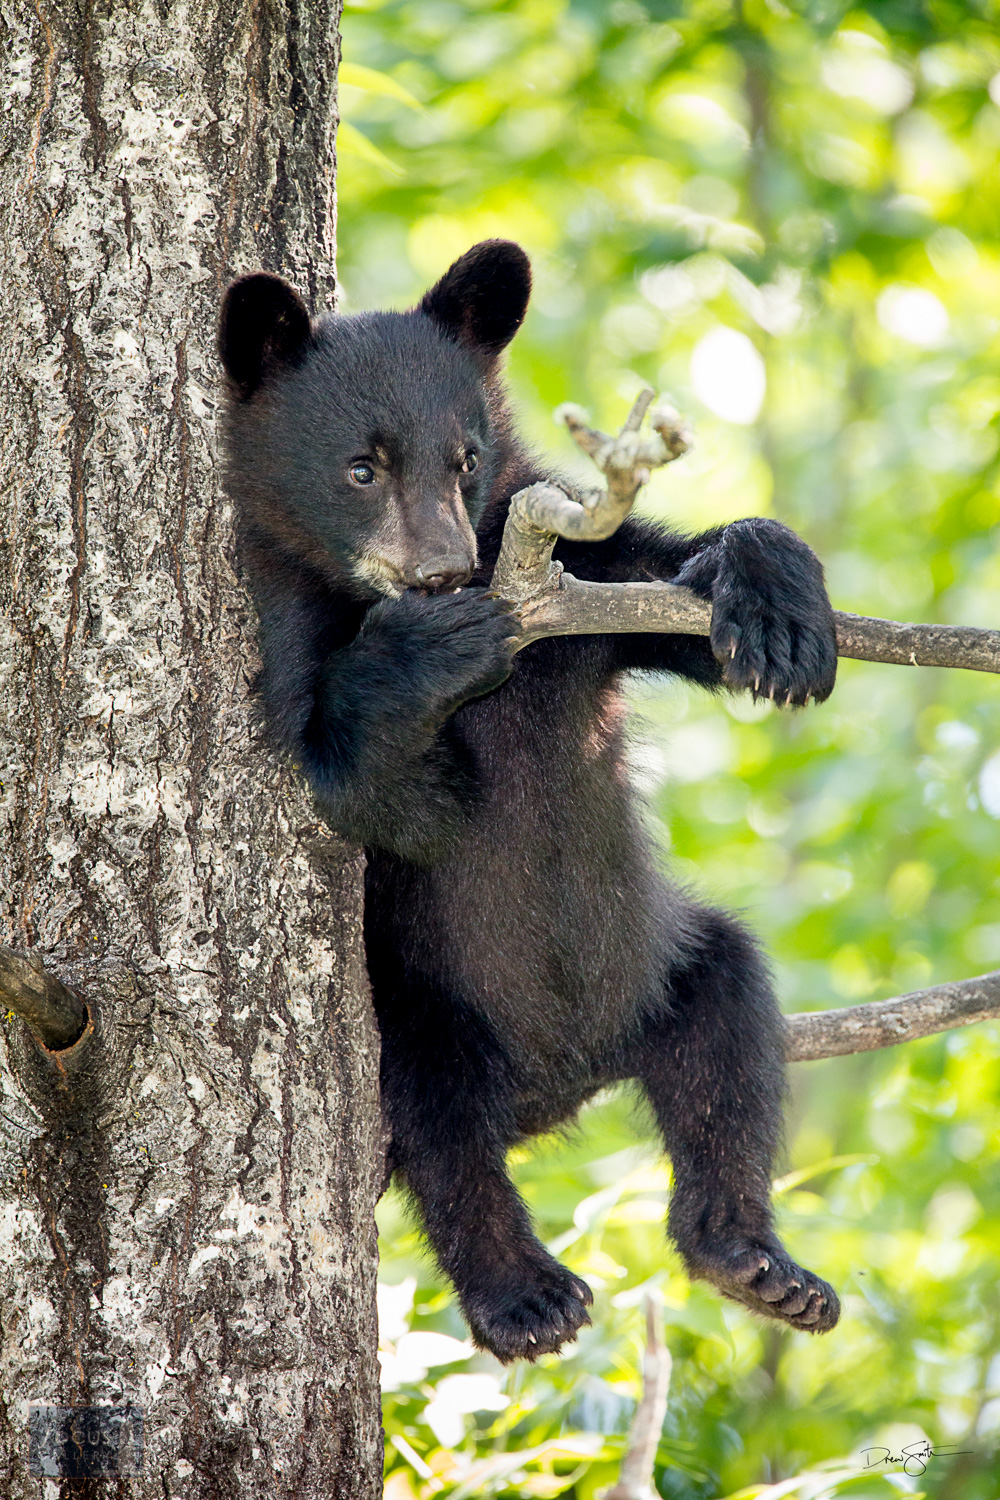 Young black bear cub hanging out up a tree.